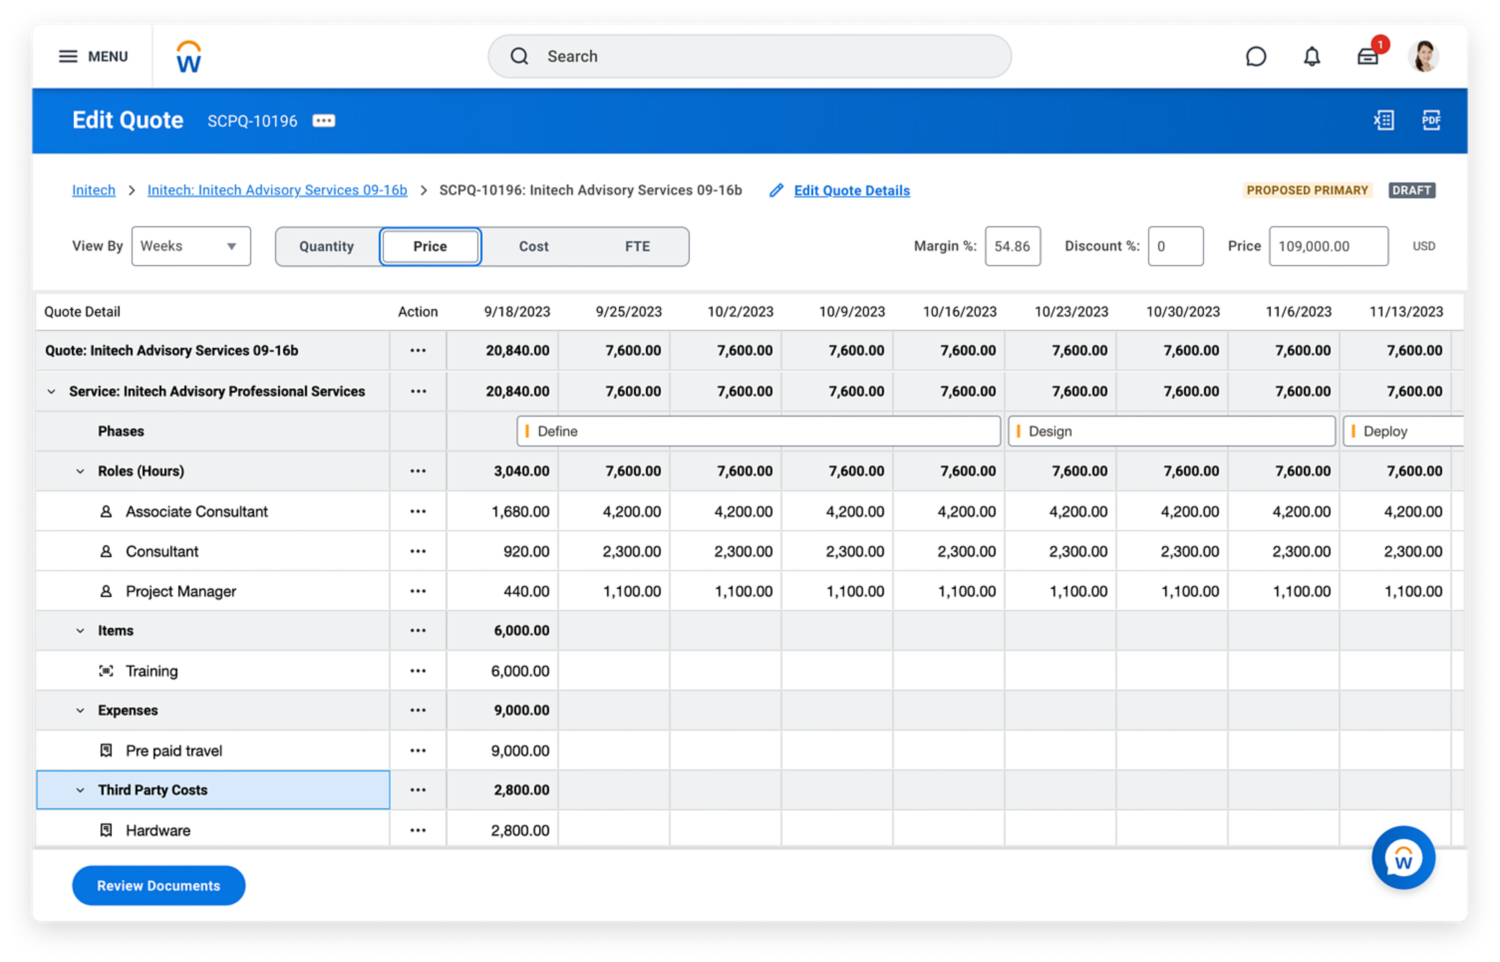 Workday Services CPQ (Configure, Price, Quote) Create Quote dashboard. CPQ software